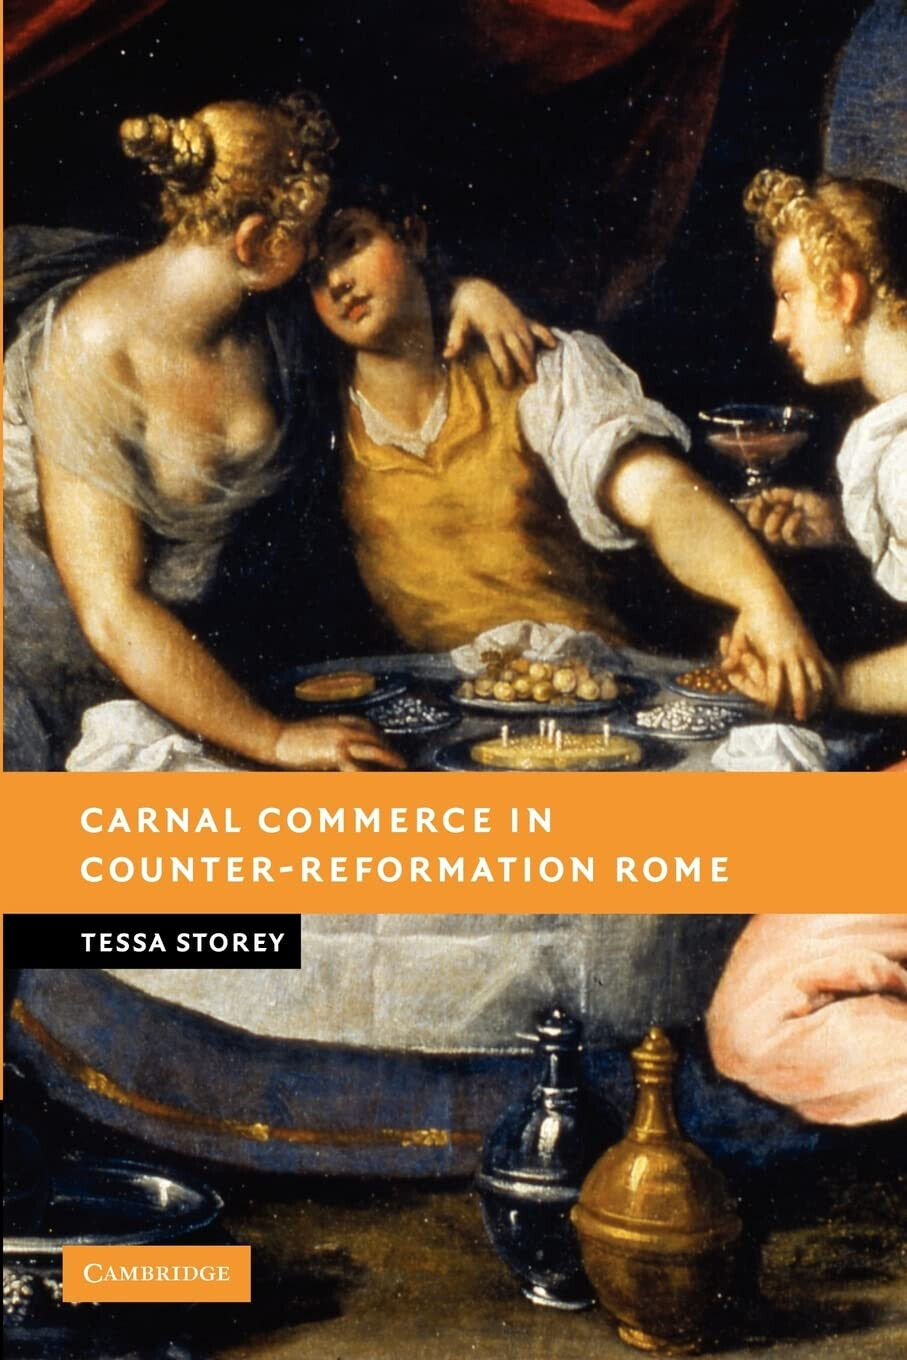 Carnal Commerce in Counter-Reformation Rome - Tessa Storey - Cambridge, 2022